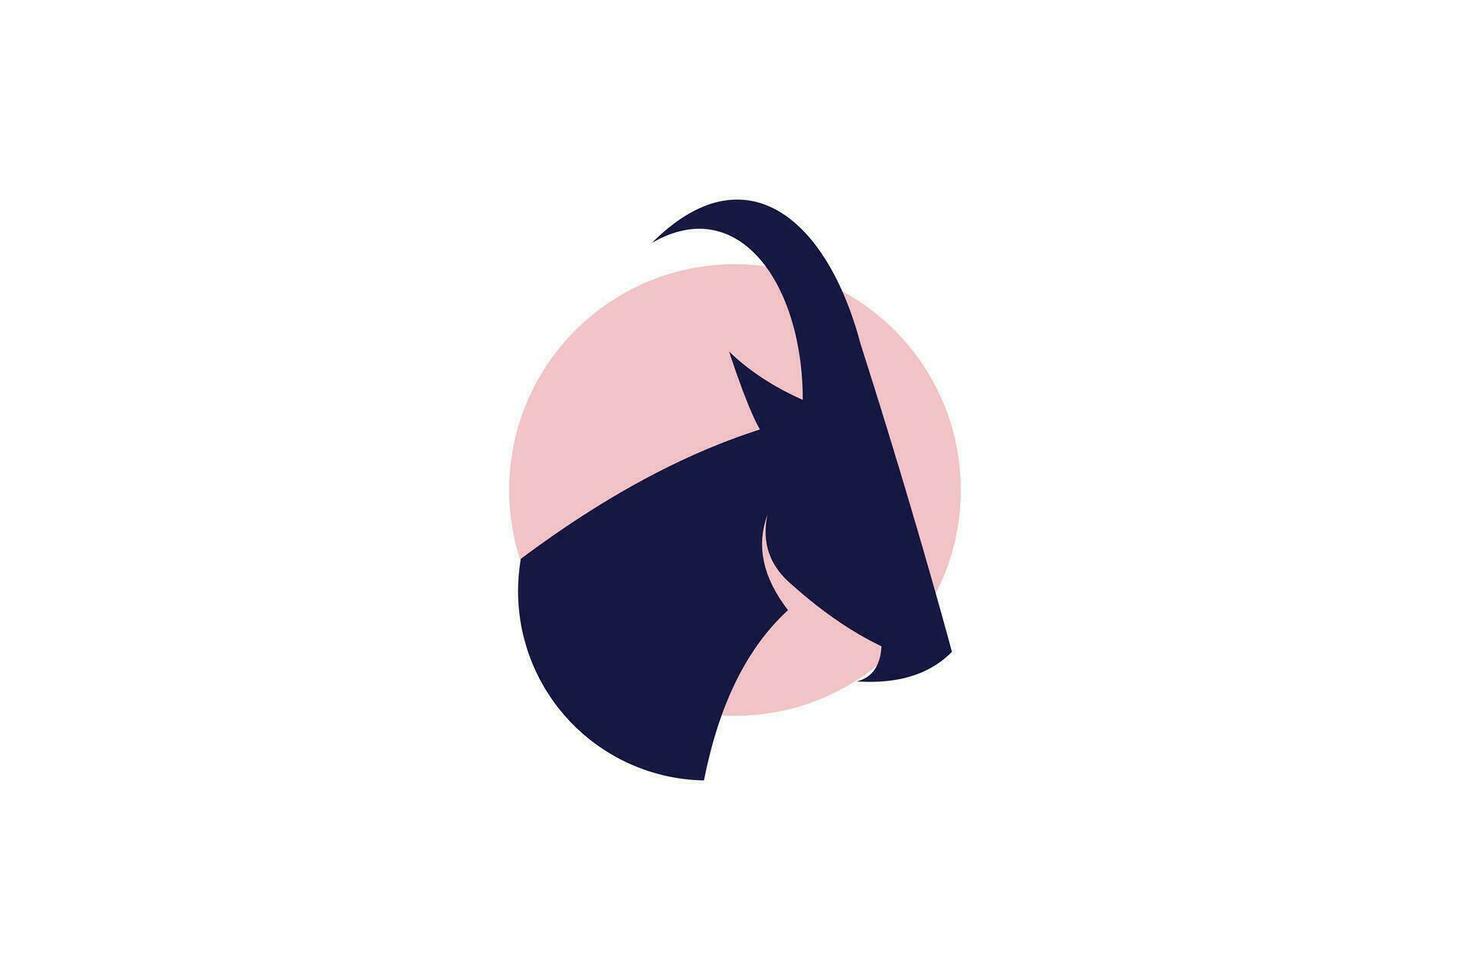 Goat logo design with modern creative style vector